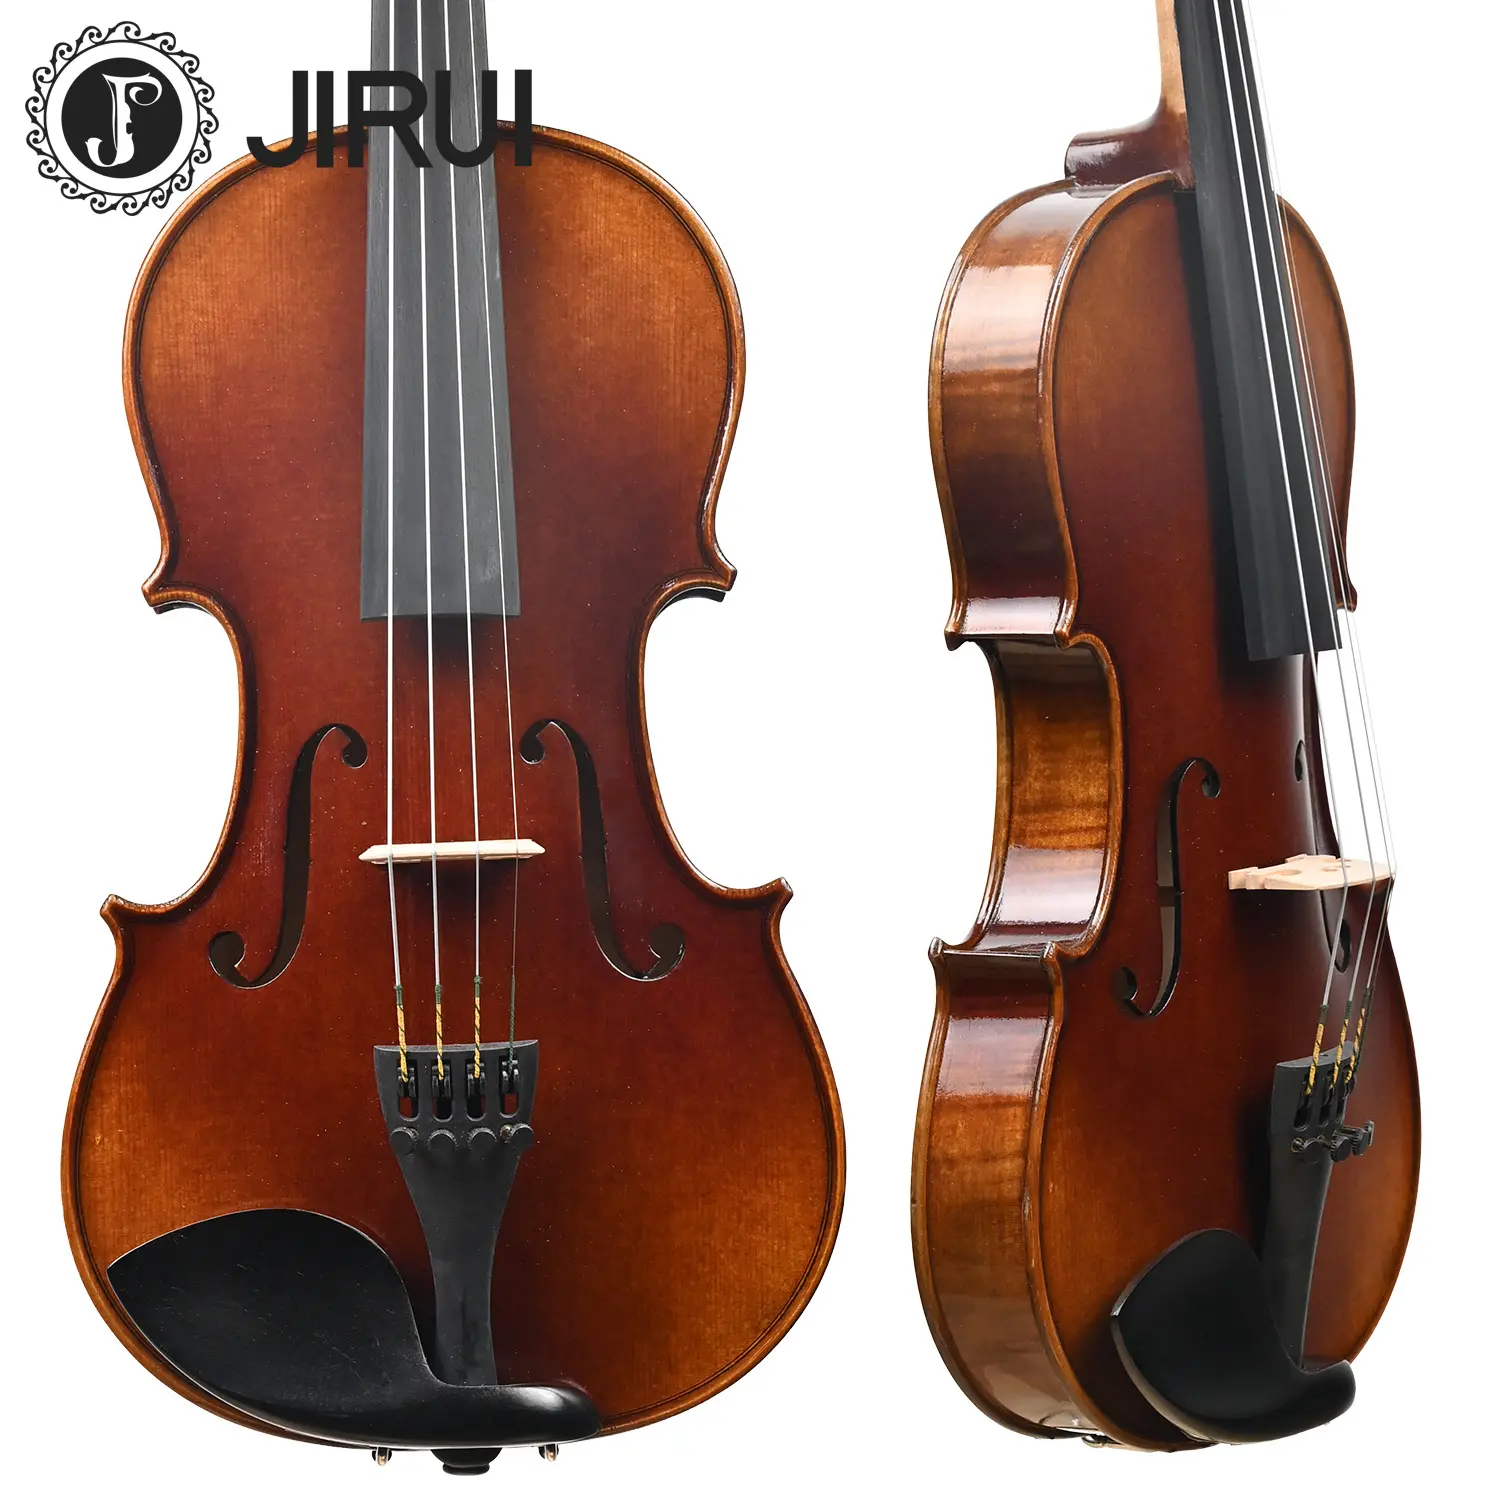 Top Selling 4/4 Professional Handmade Violin High Quality Advanced Antique Simple Color Nice Flamed Maple Spruce Face Material